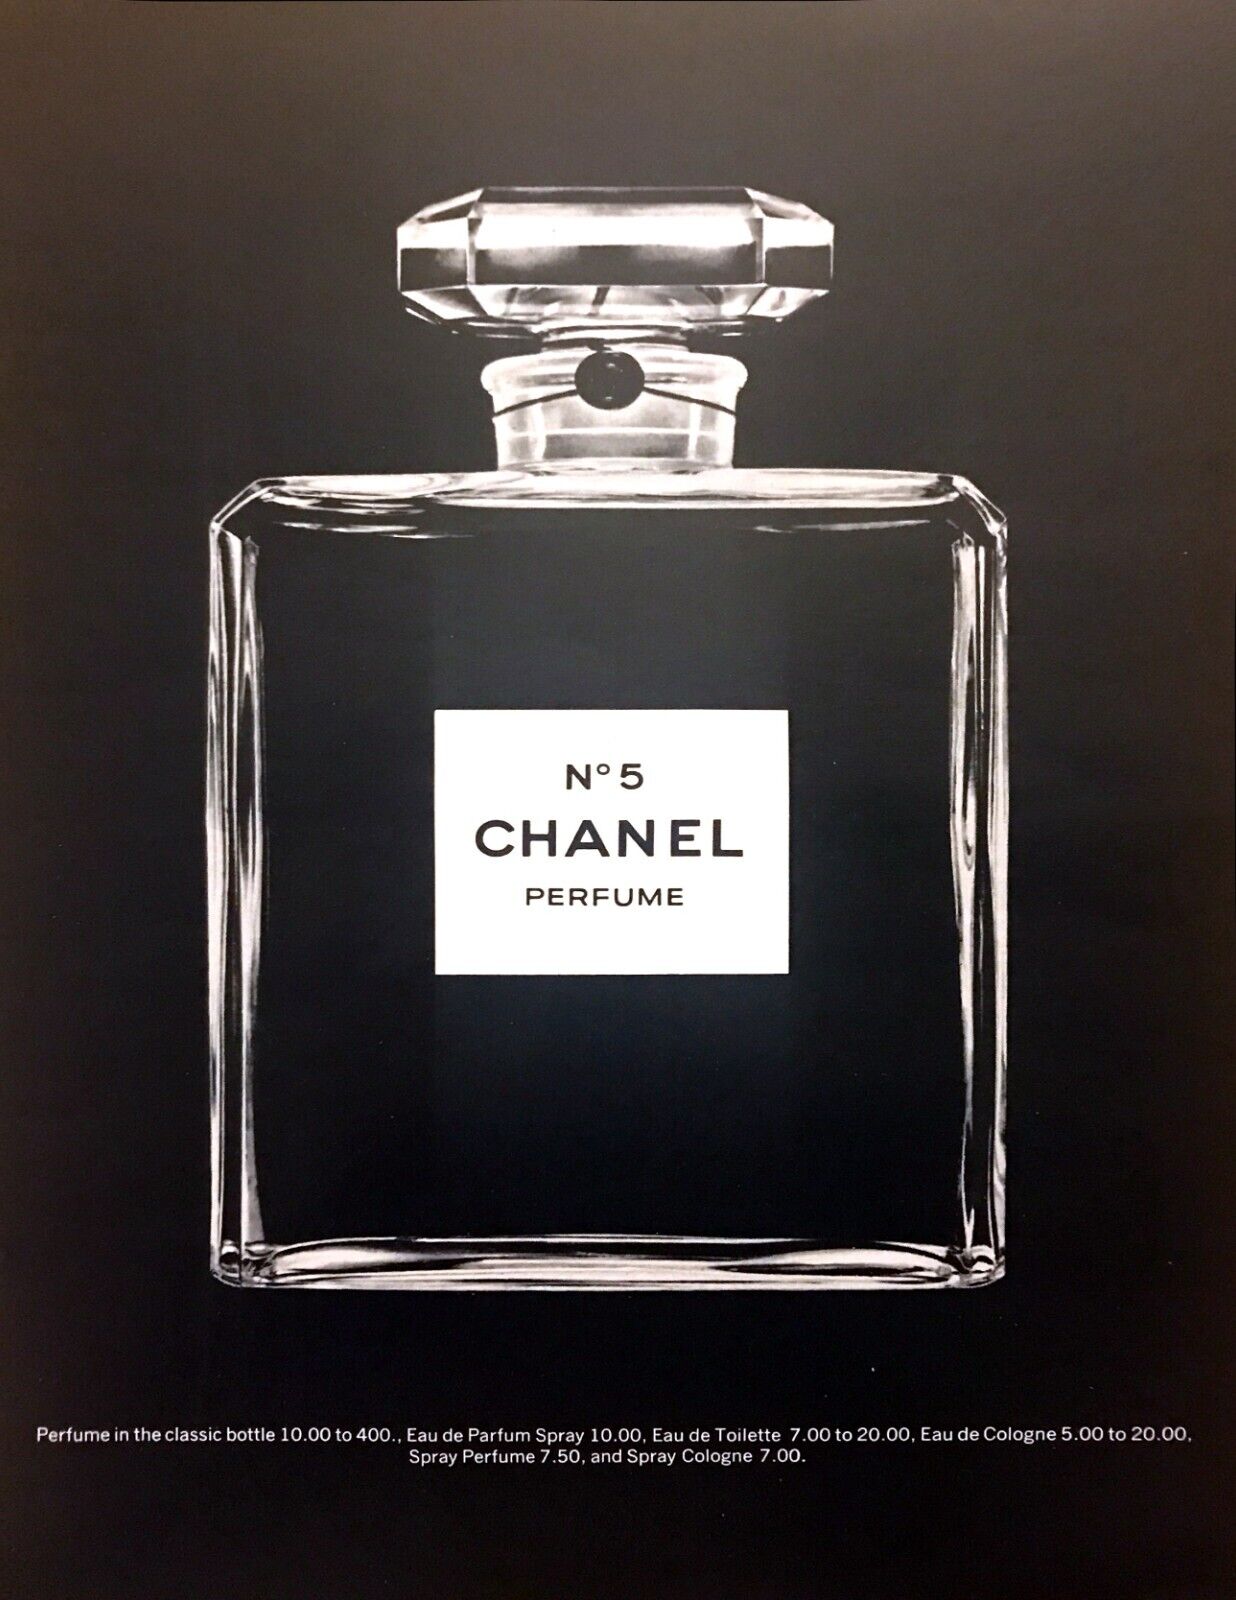 1974 Chanel No. 5 Chanel Classic LARGE Perfume Bottle photo vintage print ad